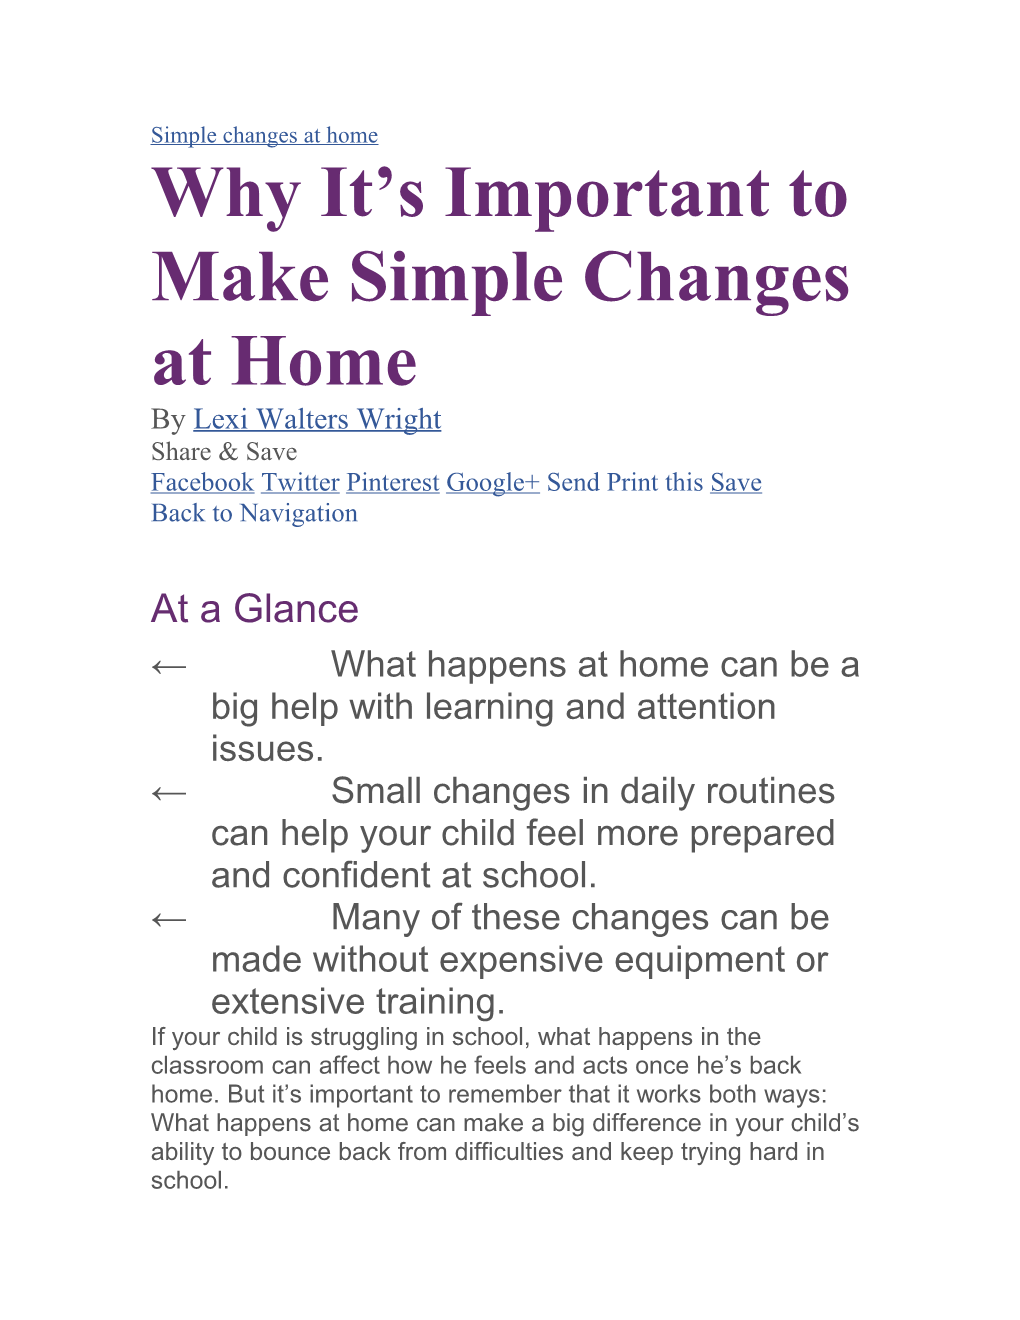 Why It S Important to Make Simple Changes at Home